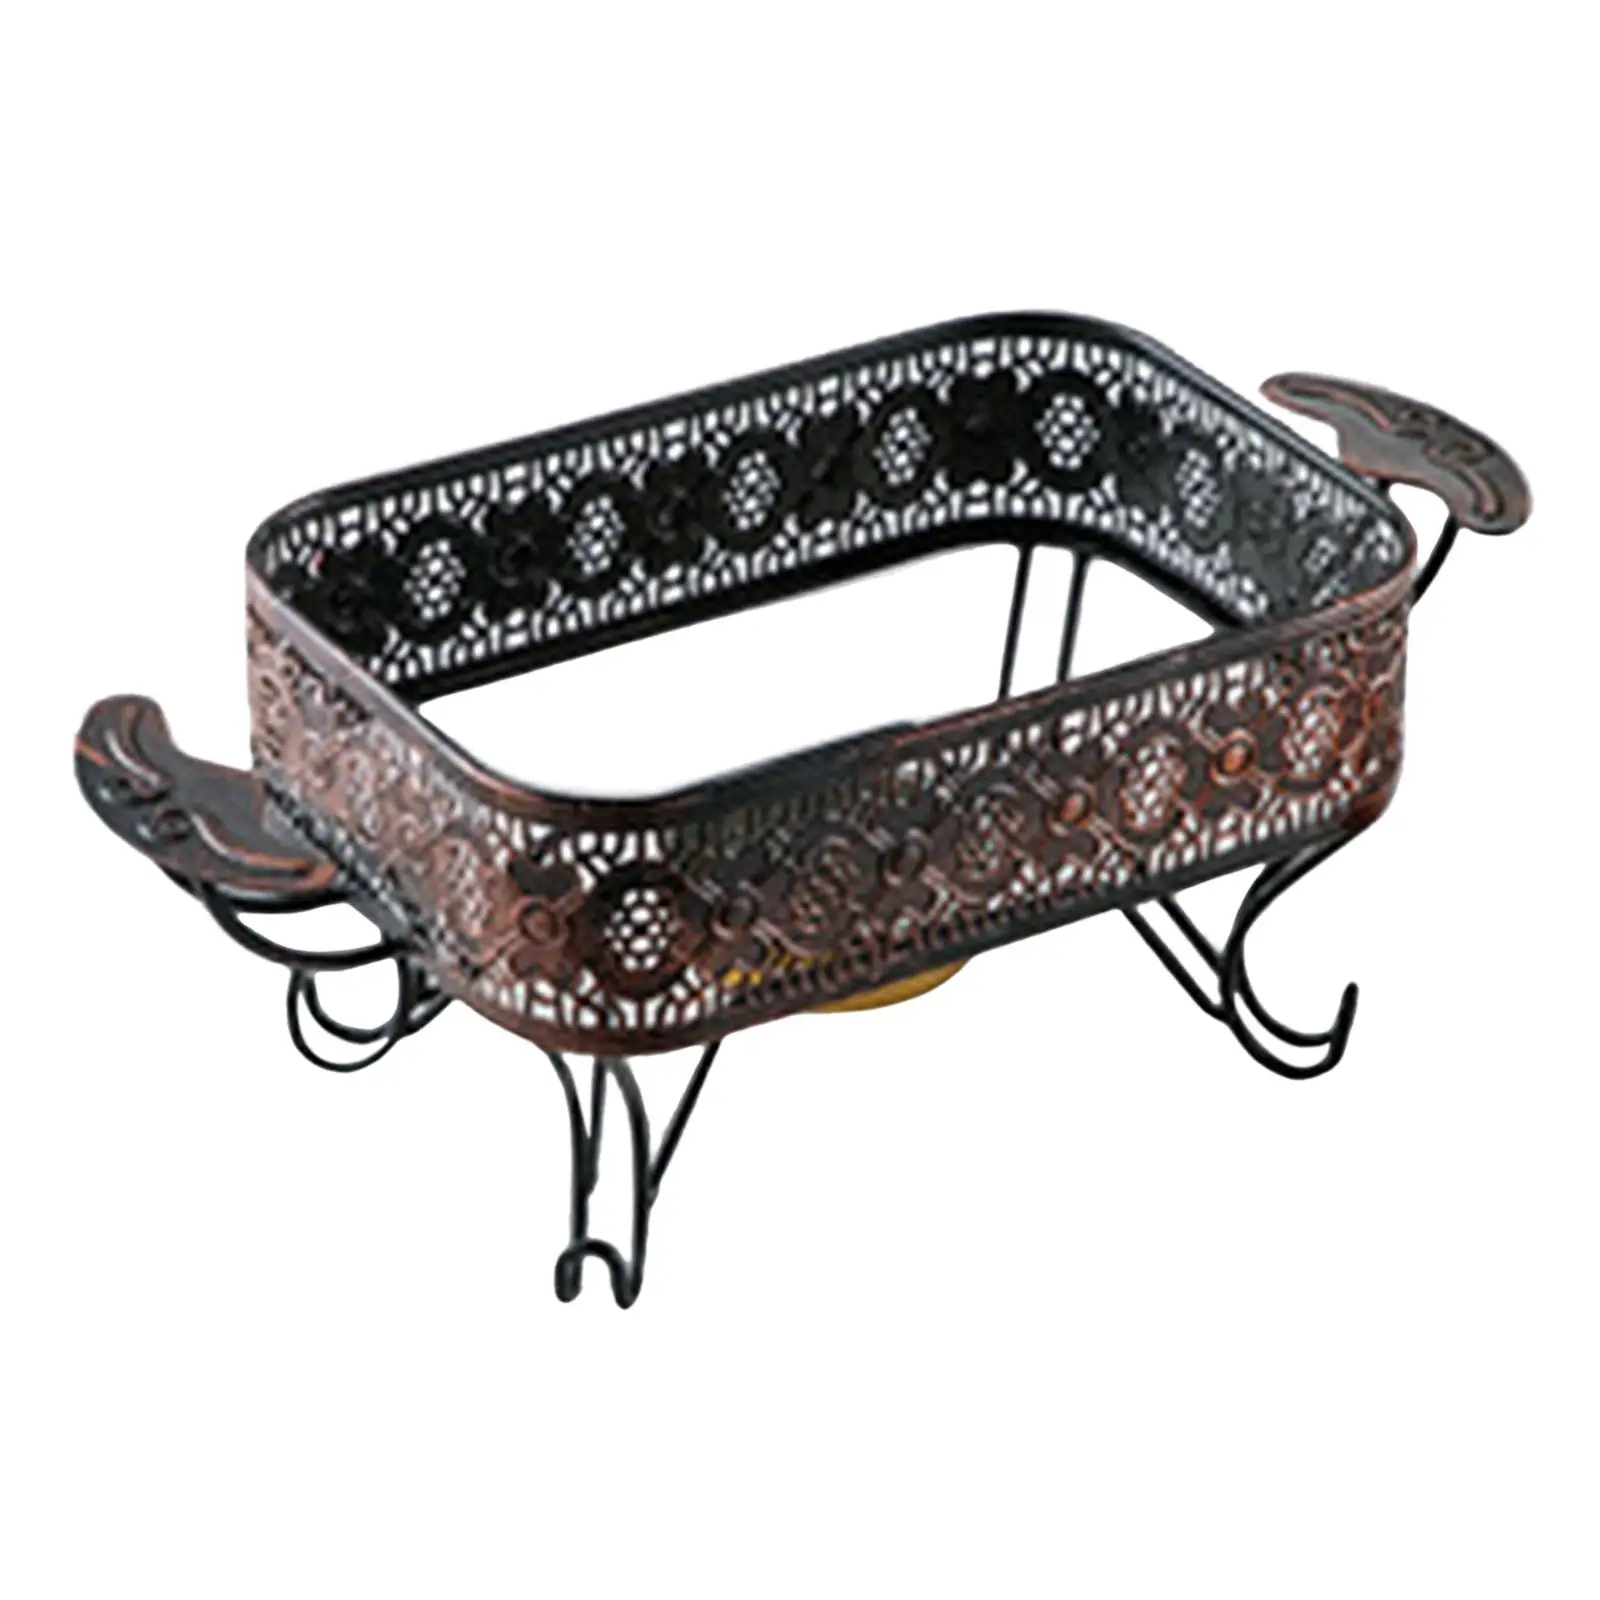 Iron Rack Stand Support for Fish Grill Roasting Pan with Two Gripping Handles Size 27.5x18.5x16cm Accessory Durable Material